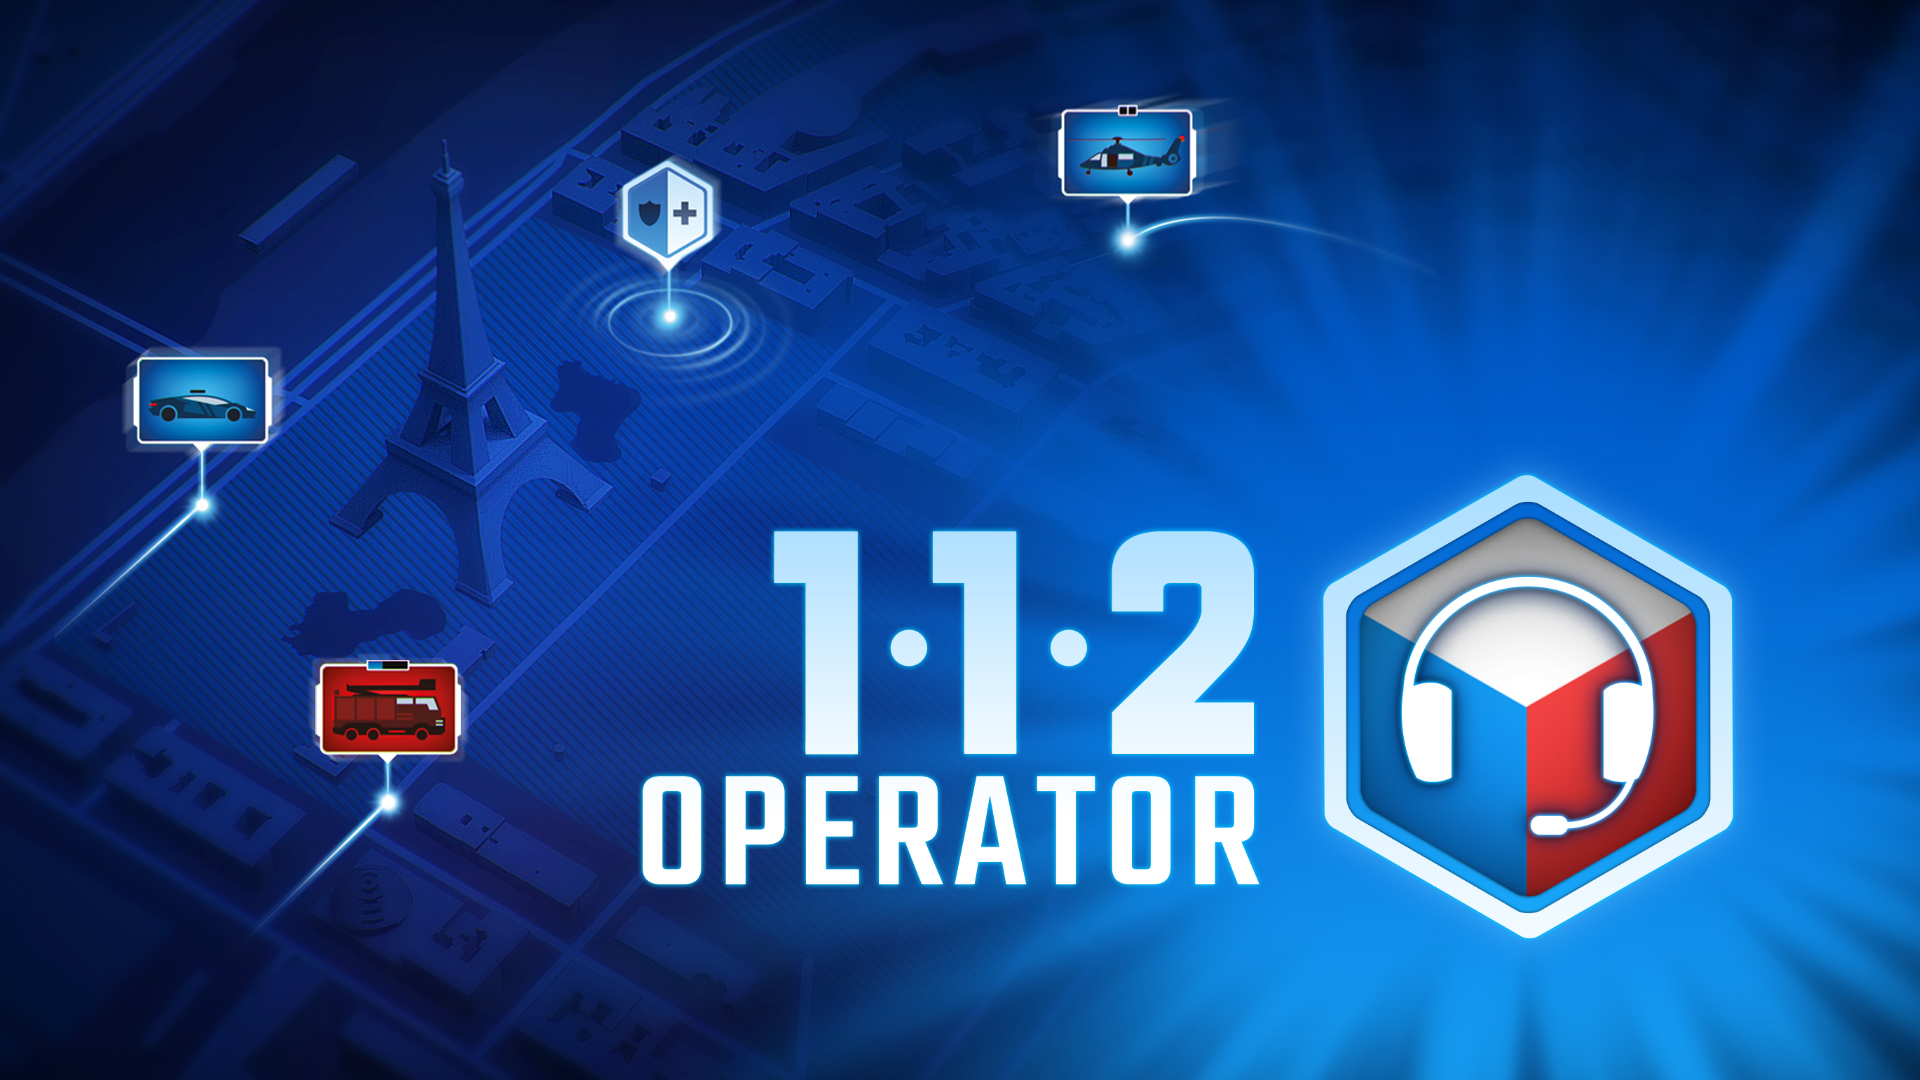 112 operator free download android